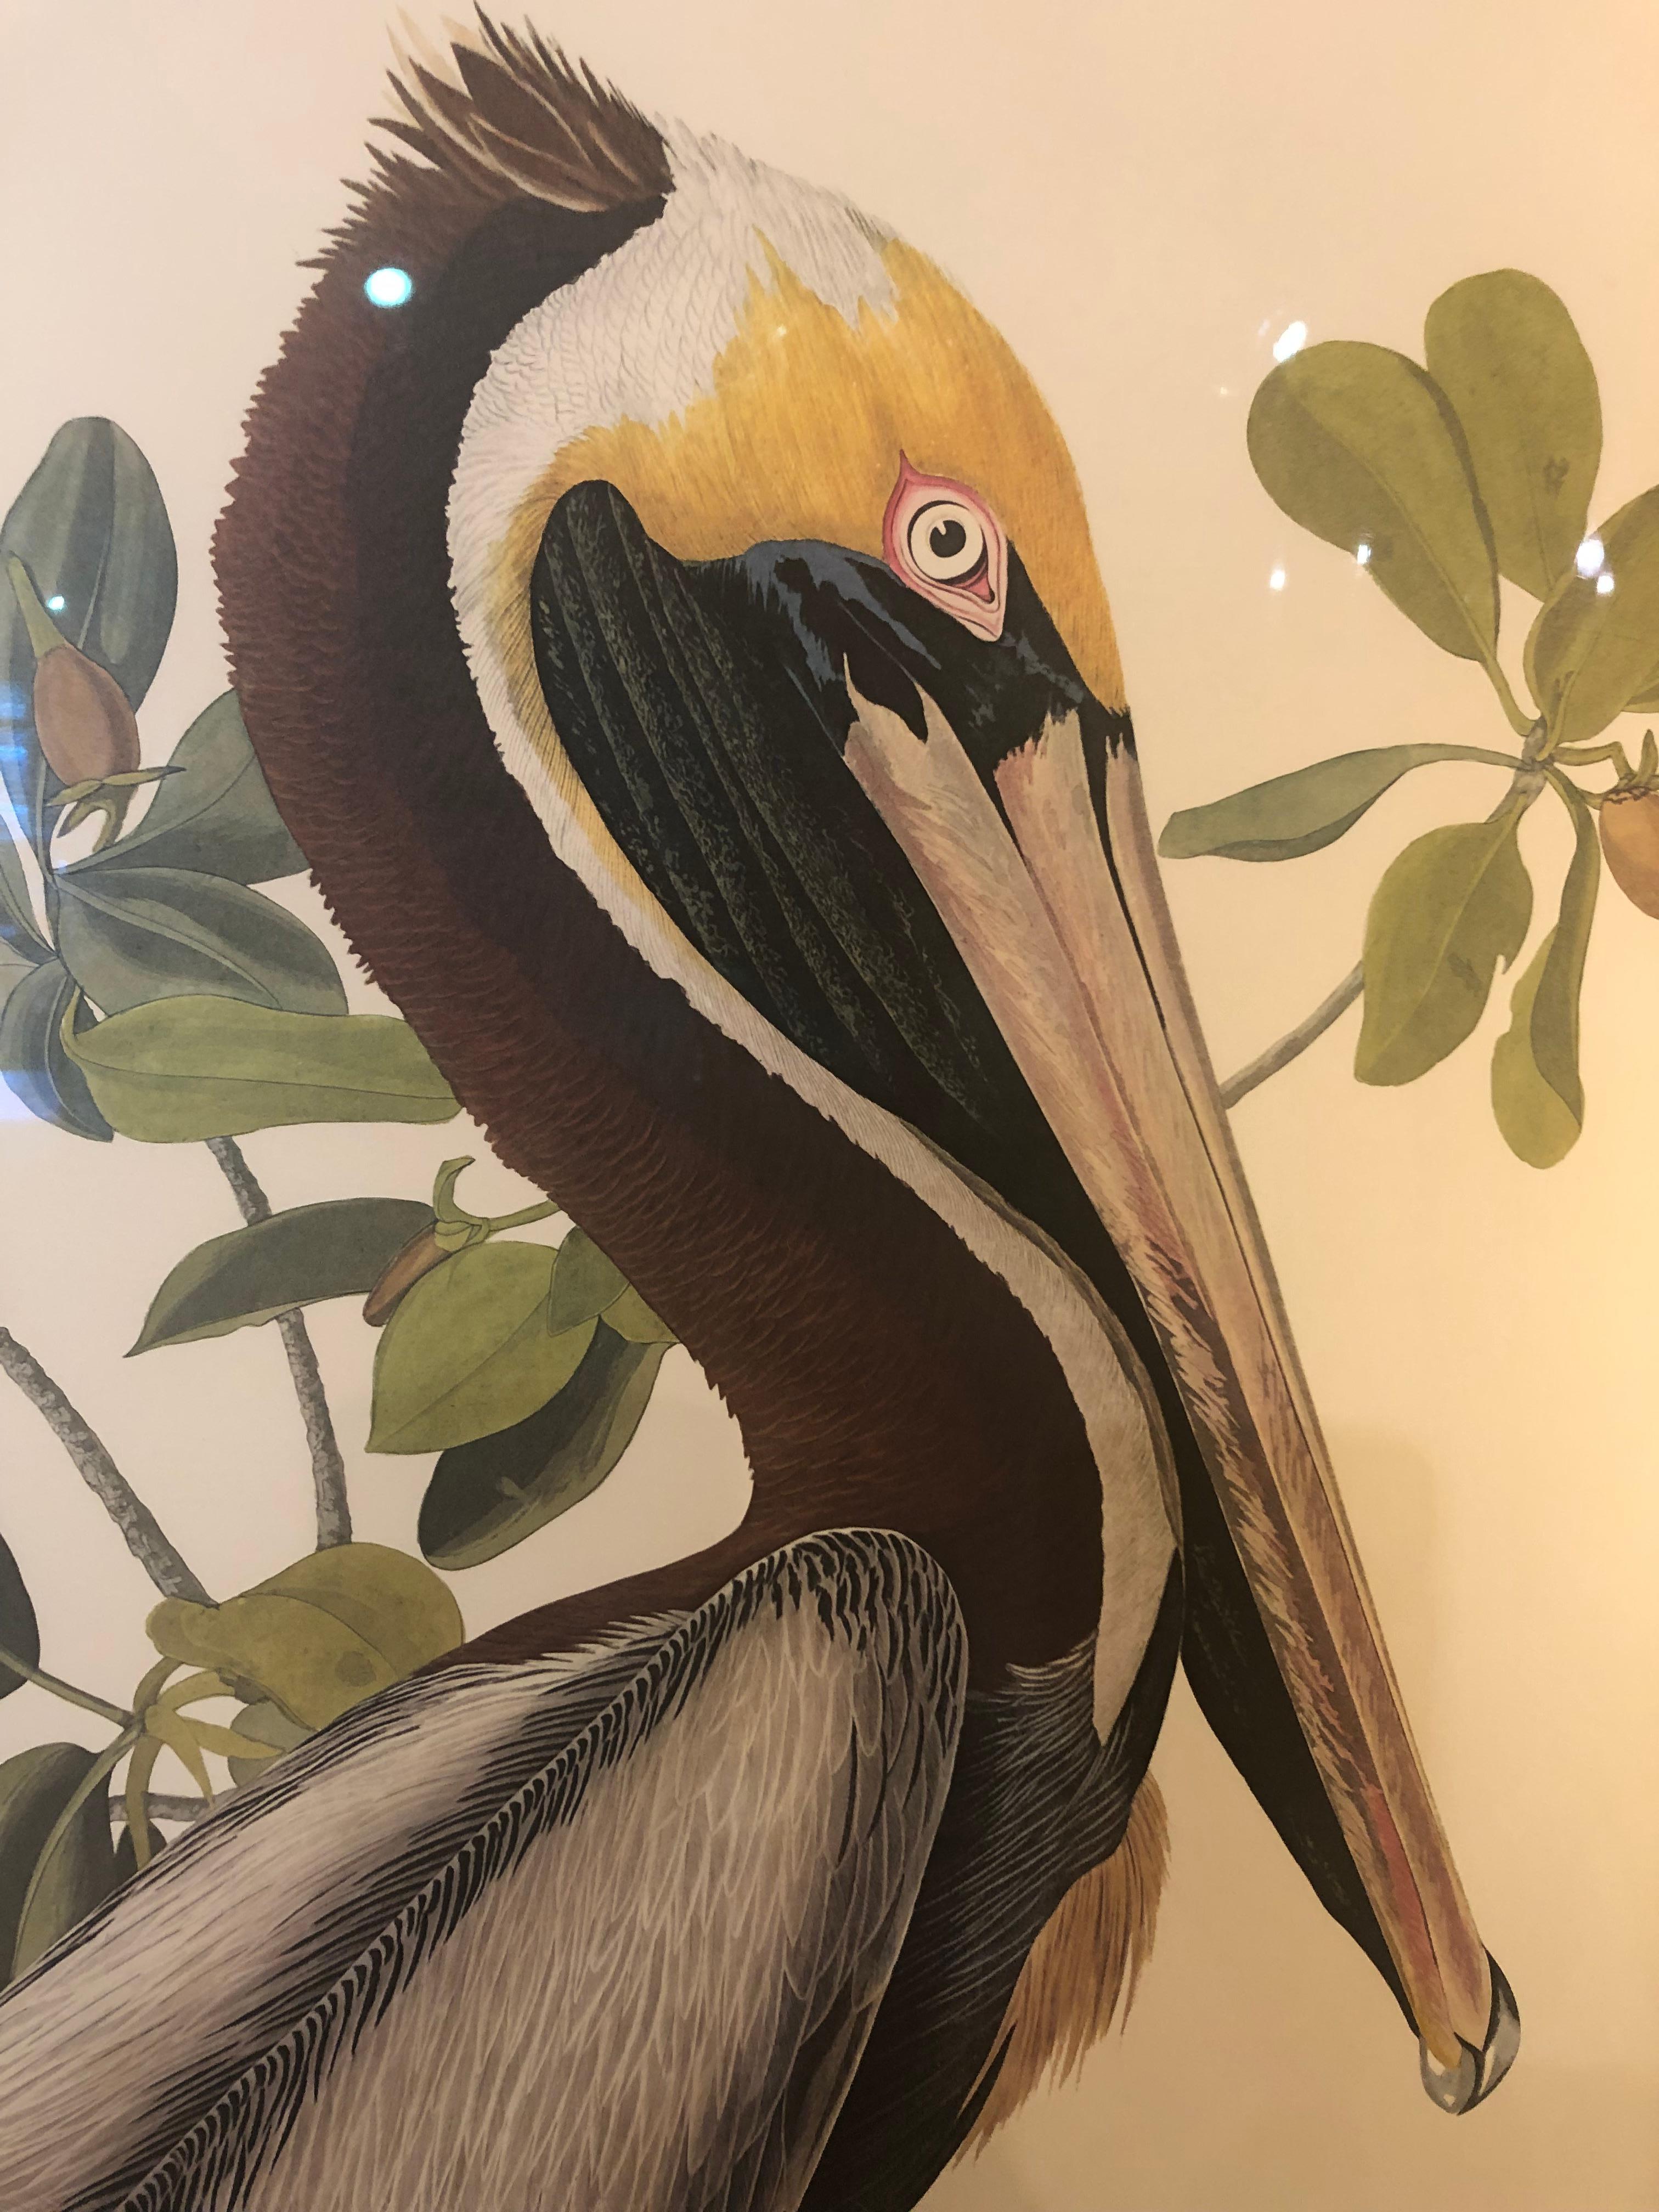 Beautiful large fine quality print of a Brown Pelican by JJ Audubon, framed handsomely. There is also another Audubon print of Red Shouldered Hawks, framed the same way to make an outstanding pair. See last photos.